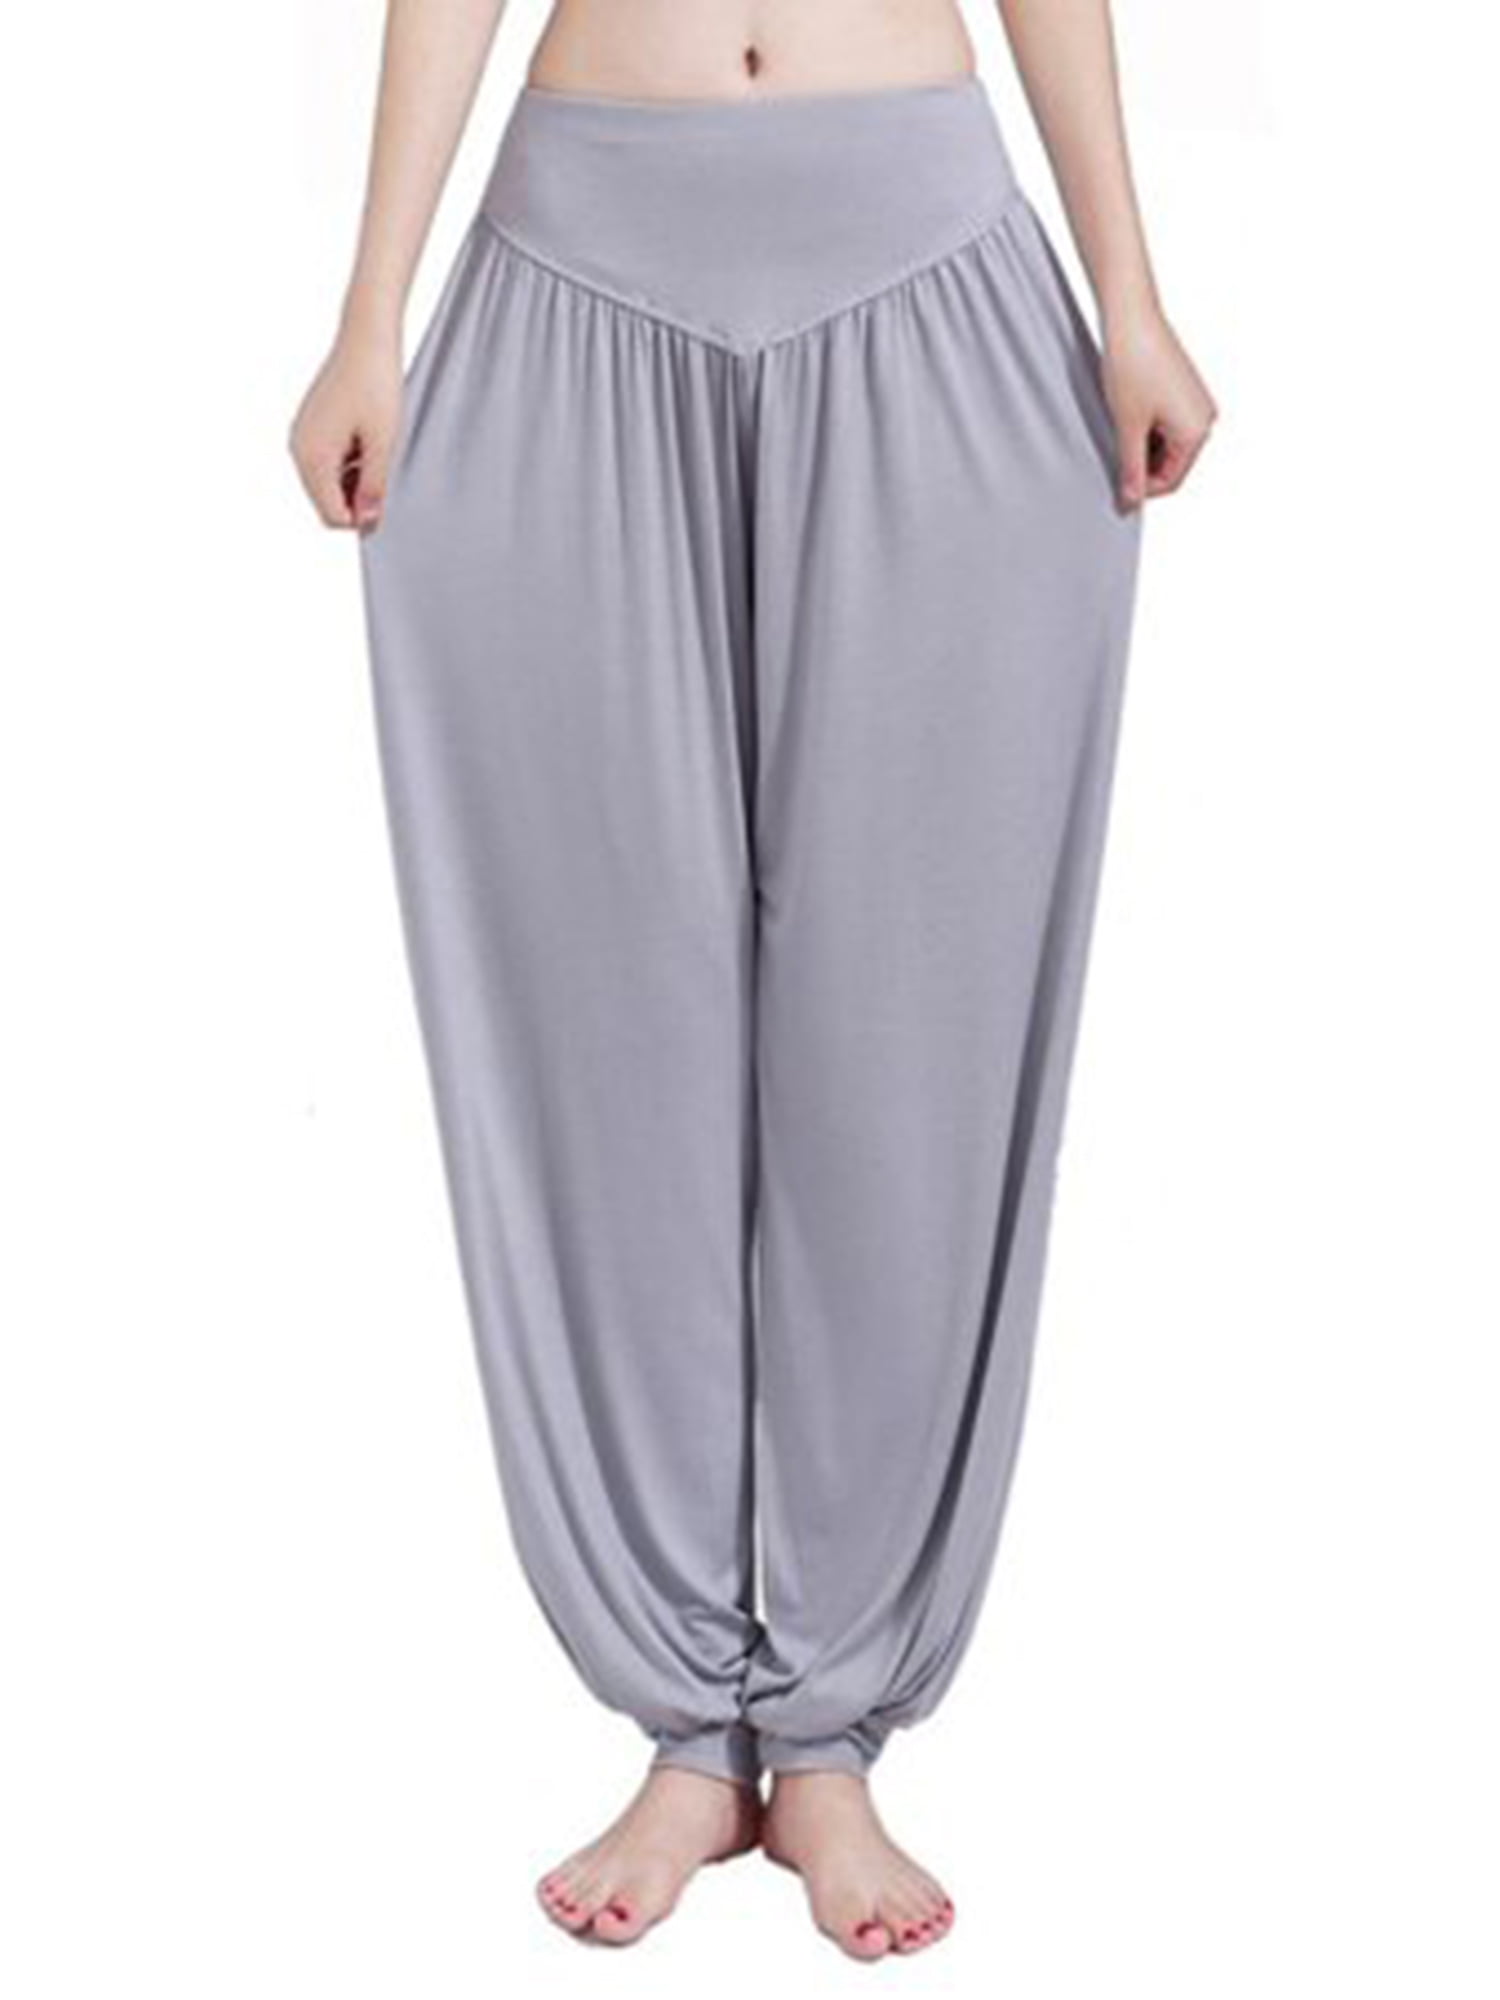 DODOING Women's Casual Yoga Pants Loose Fit Style Trousers Wide